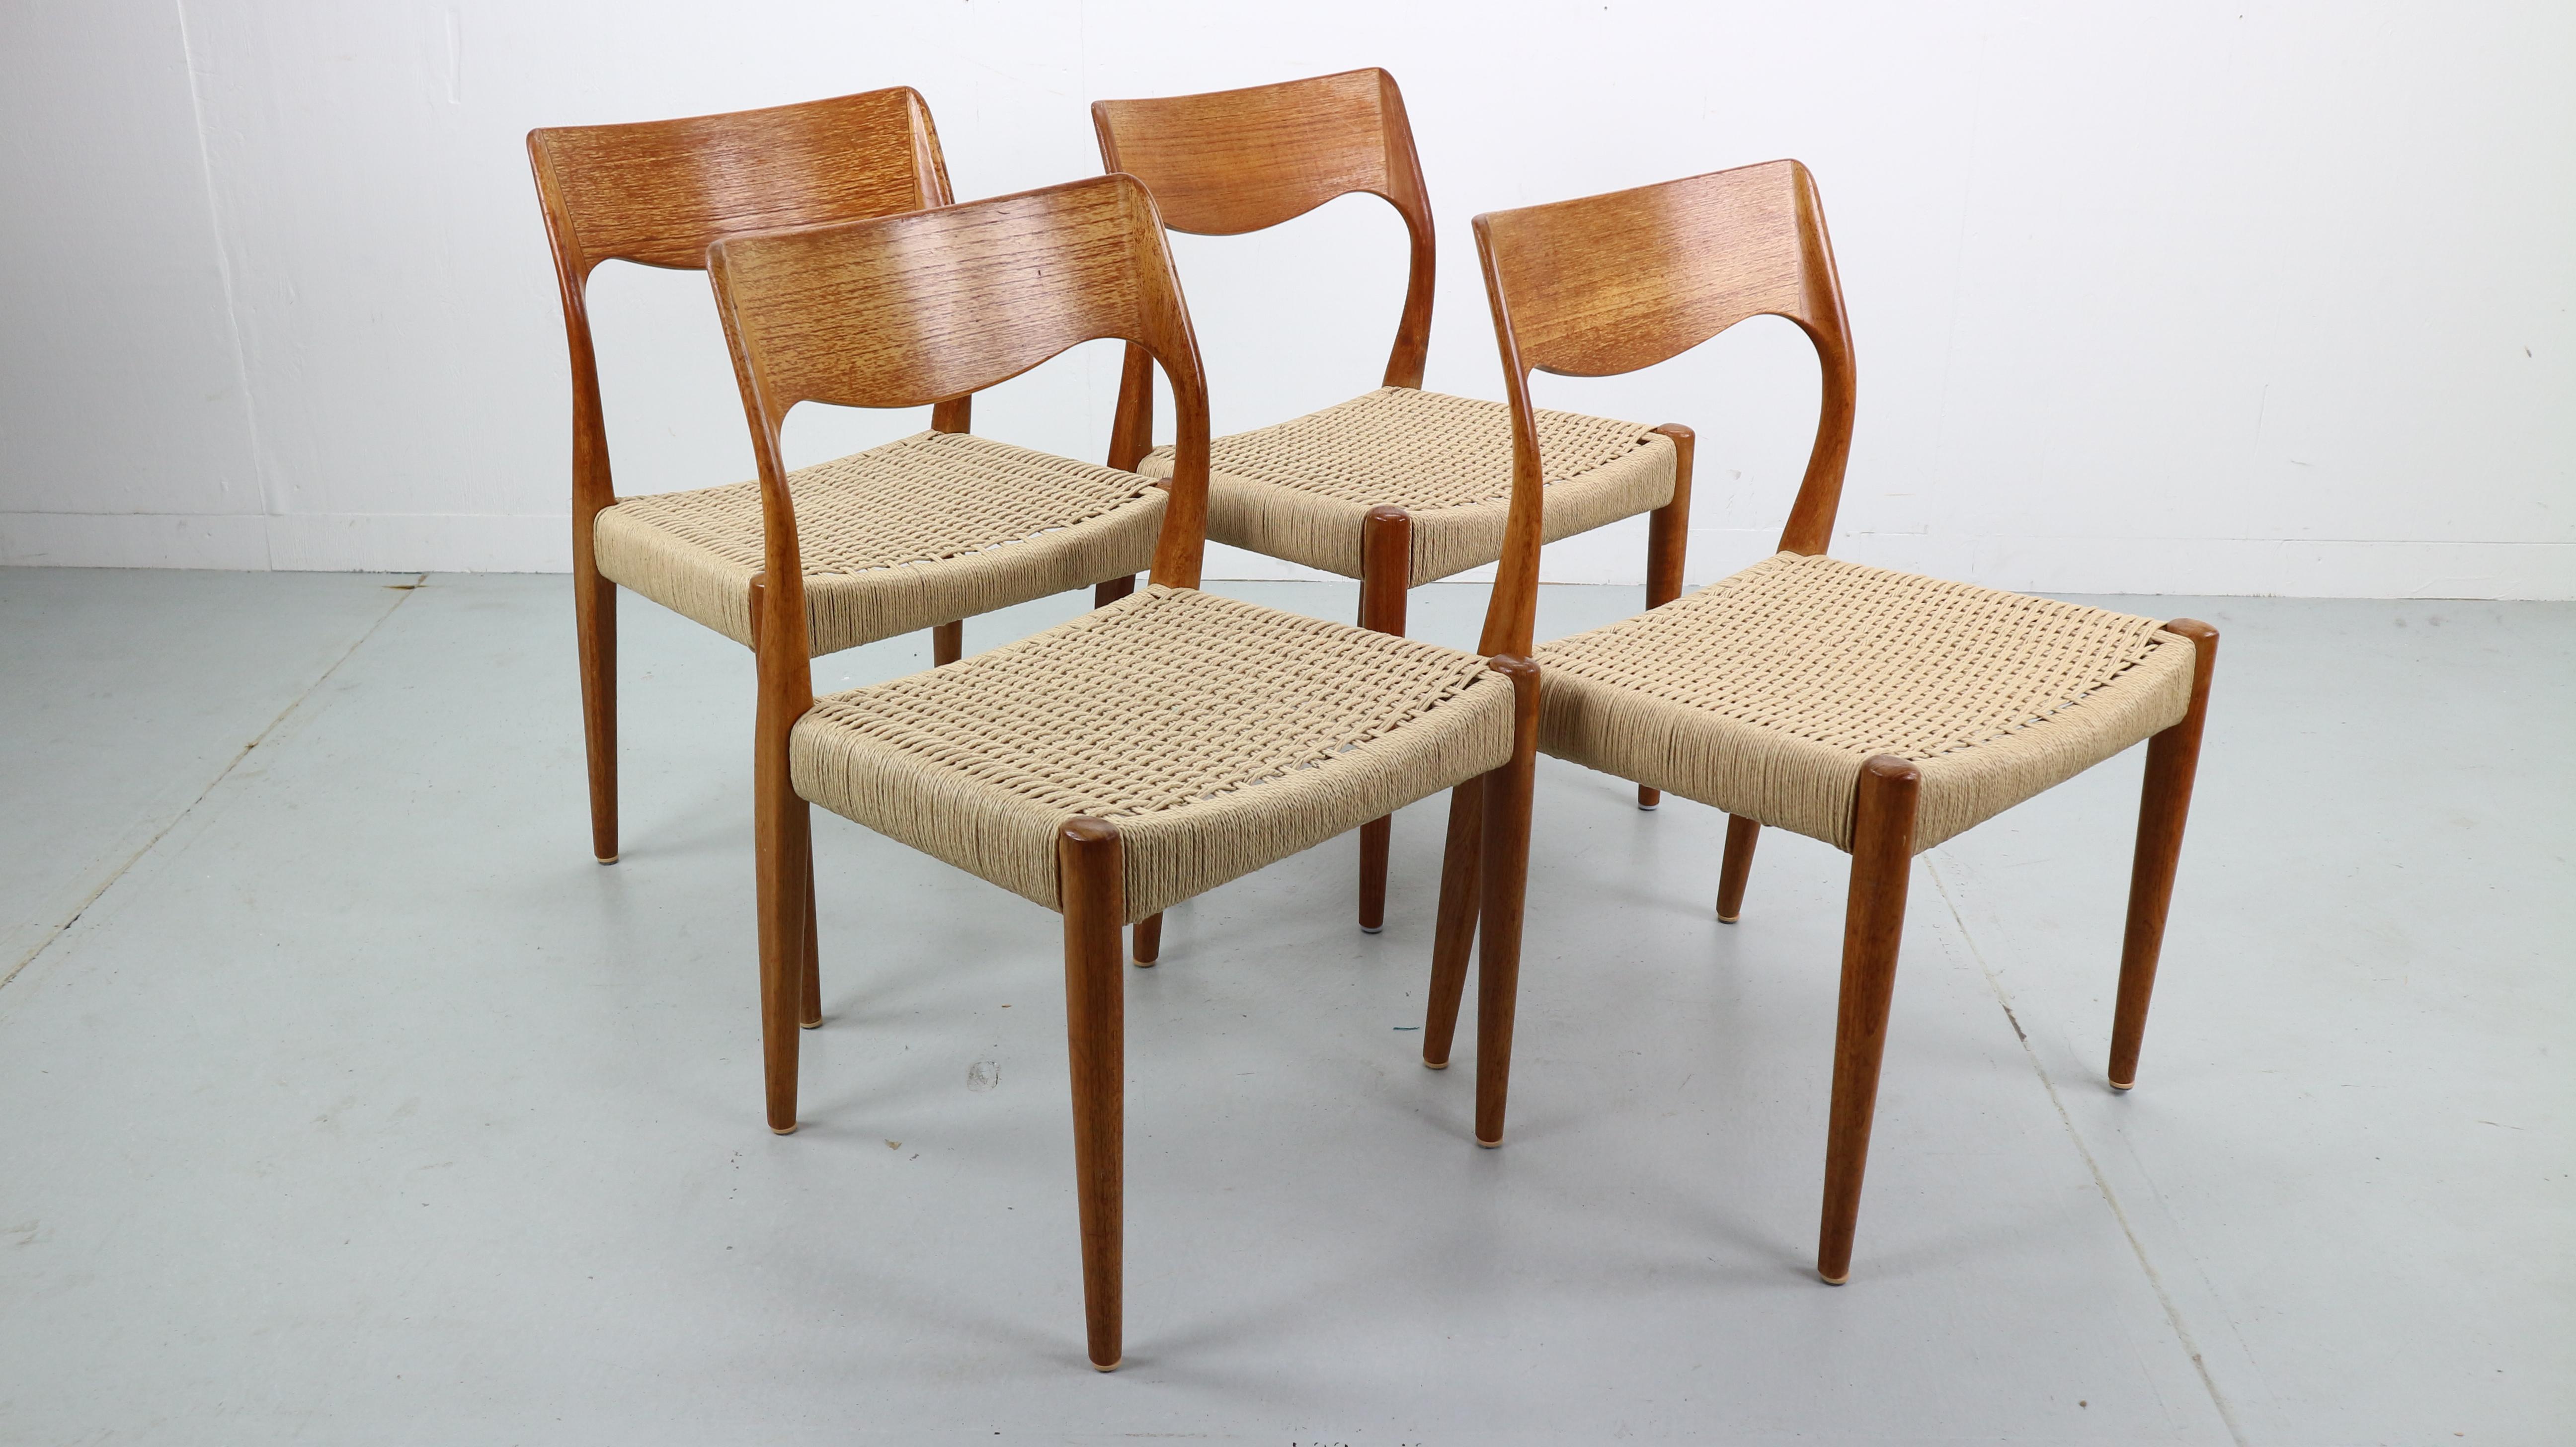 Set of 4 teak Danish Mid-Century Modern dining chairs by Niels Møller for J.L. Moller. One of the most organic designs you'll ever see.
Model number- 71.
Perfectly executed joinery connects the solid teak backrest to the rear legs and creates an